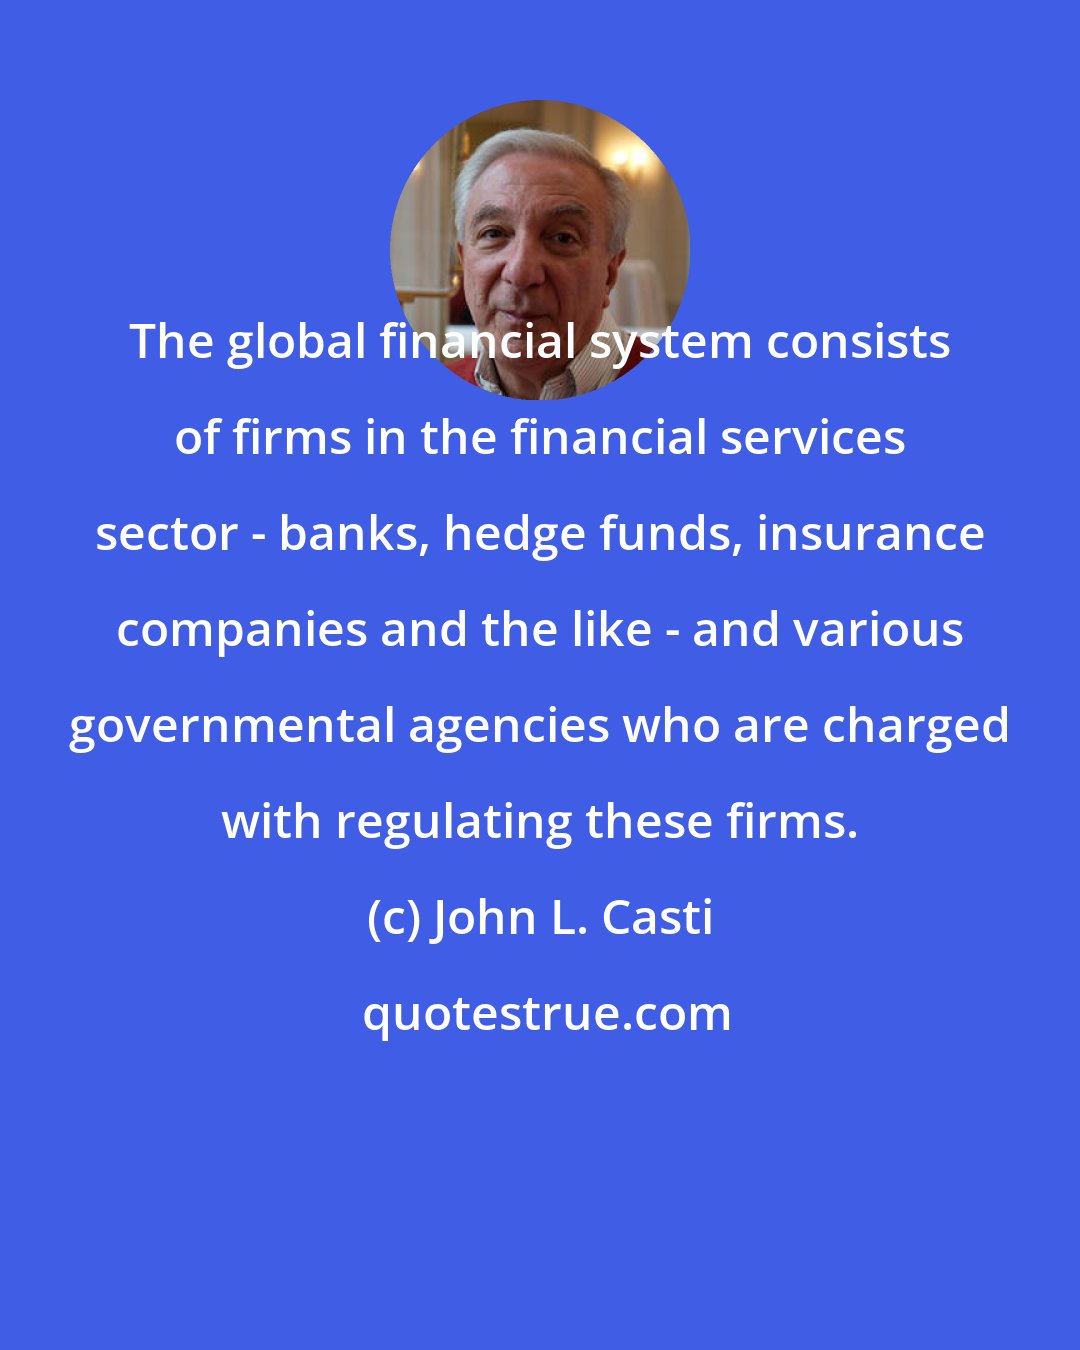 John L. Casti: The global financial system consists of firms in the financial services sector - banks, hedge funds, insurance companies and the like - and various governmental agencies who are charged with regulating these firms.